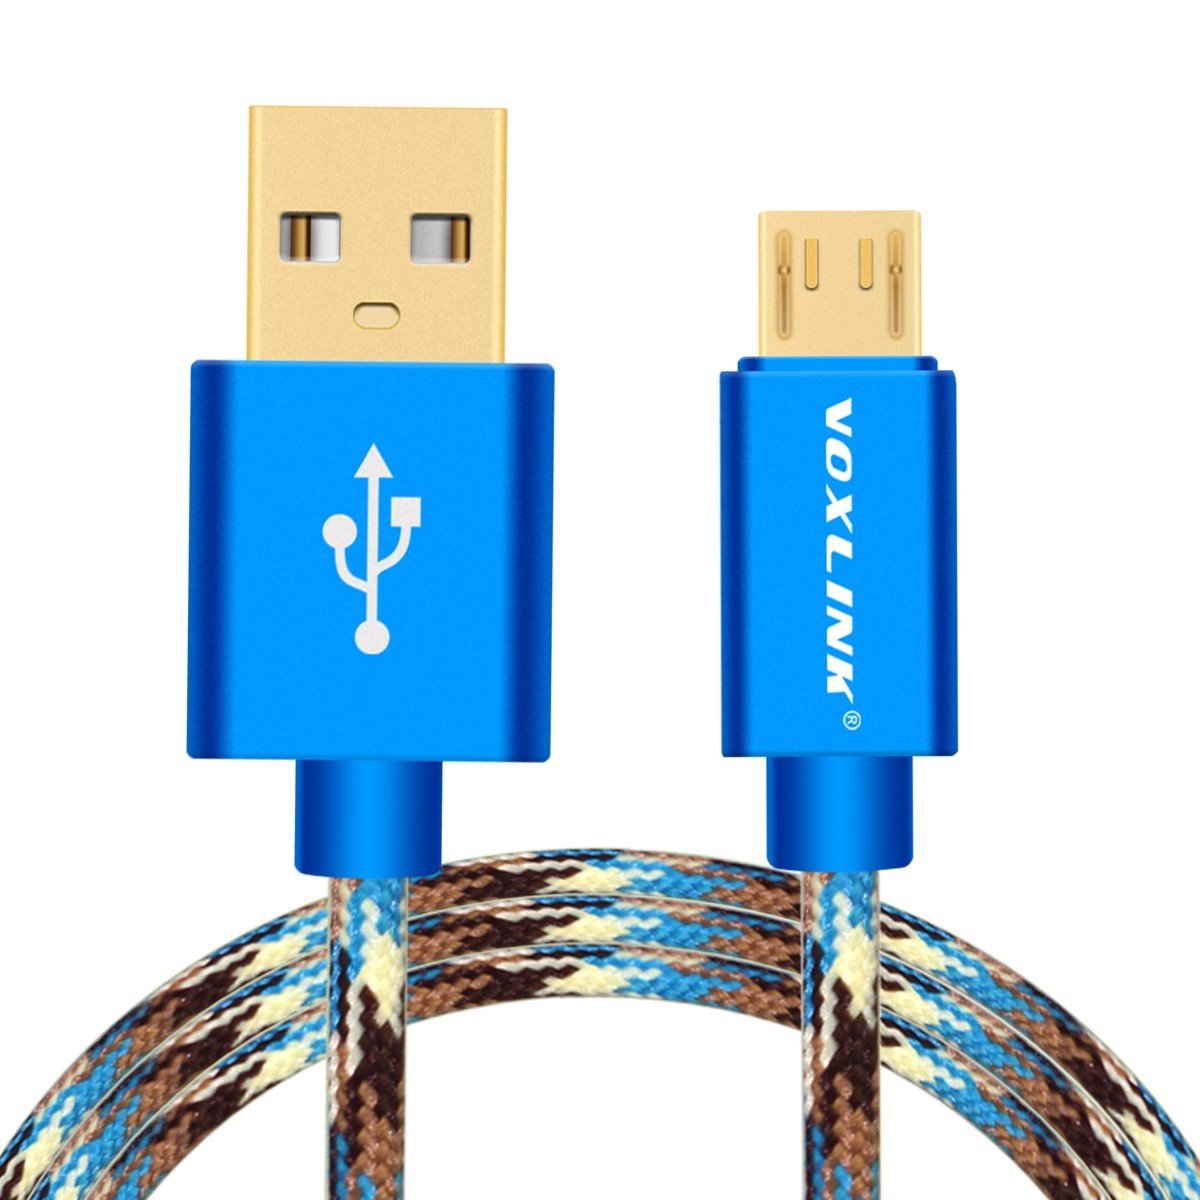 Original 5V 2A Micro USB Cable VOXLINK USB Charger Cable For Samsung/xiaomi/lenovo/huawei/HTC/Meizu Android Mobile Phone Cables blue micro 0.25m